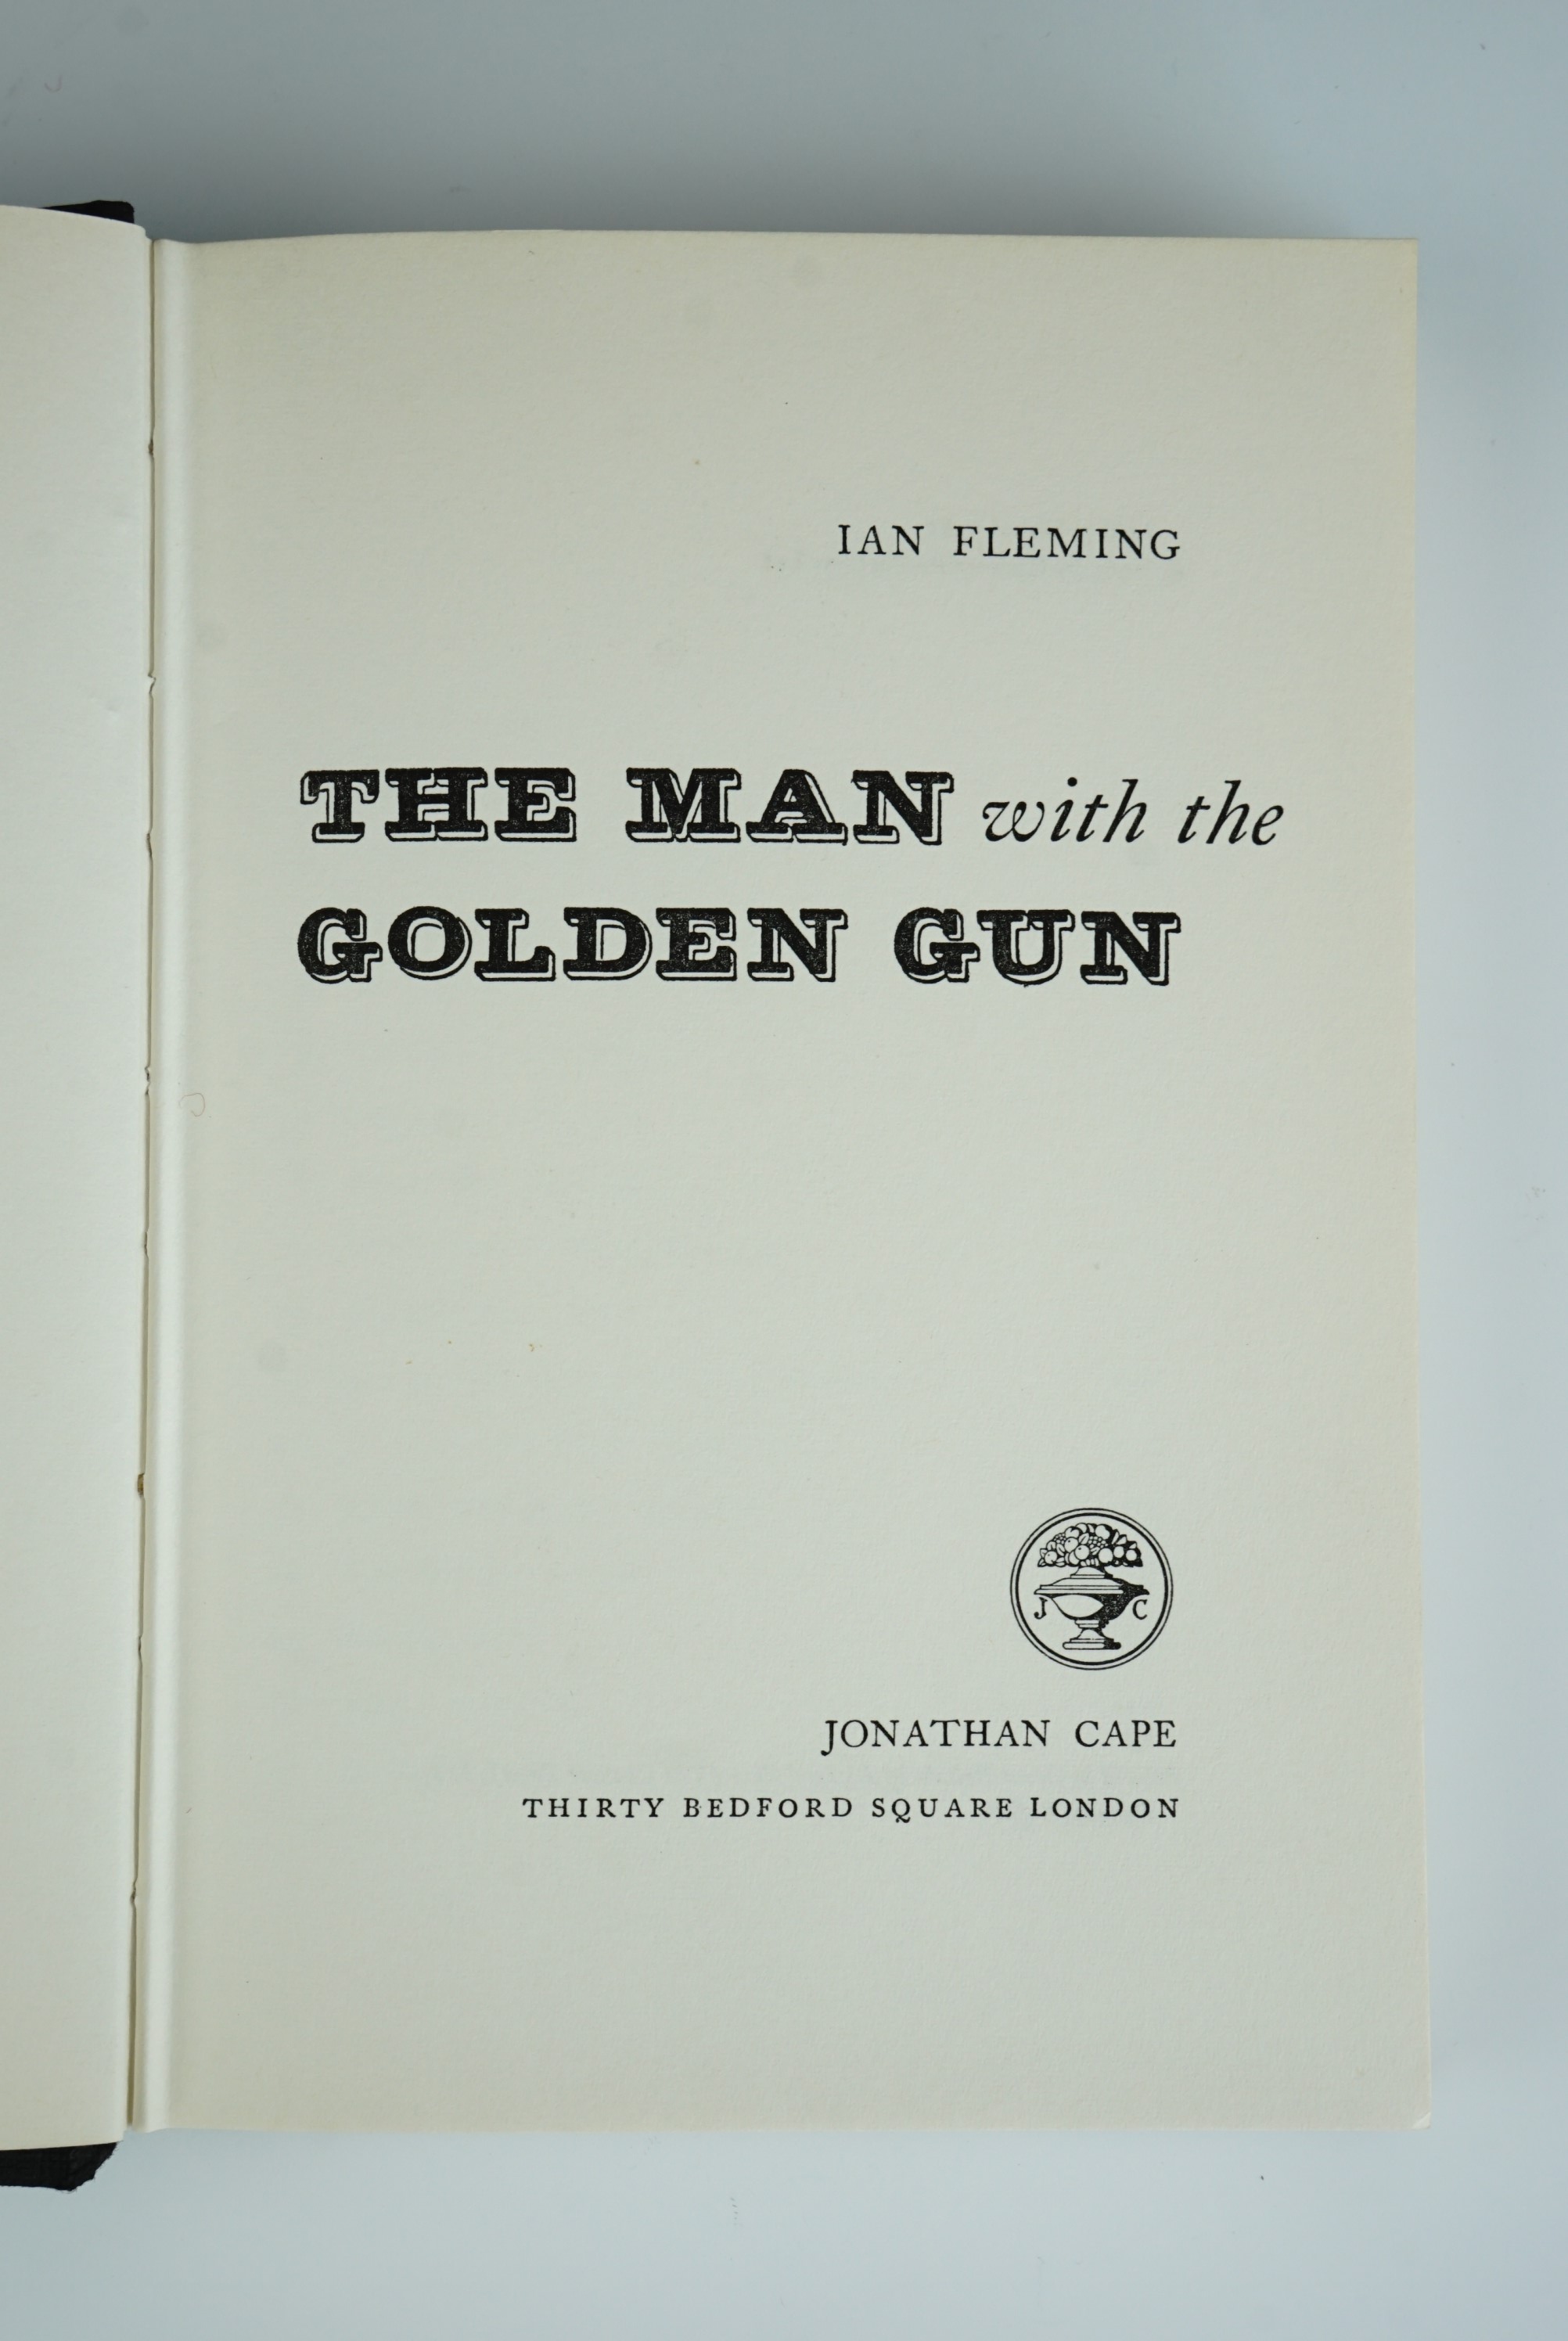 Ian Fleming, "The Man With the Golden Gun", Cape, 1965, first edition, un-clipped dust jacket - Image 2 of 3